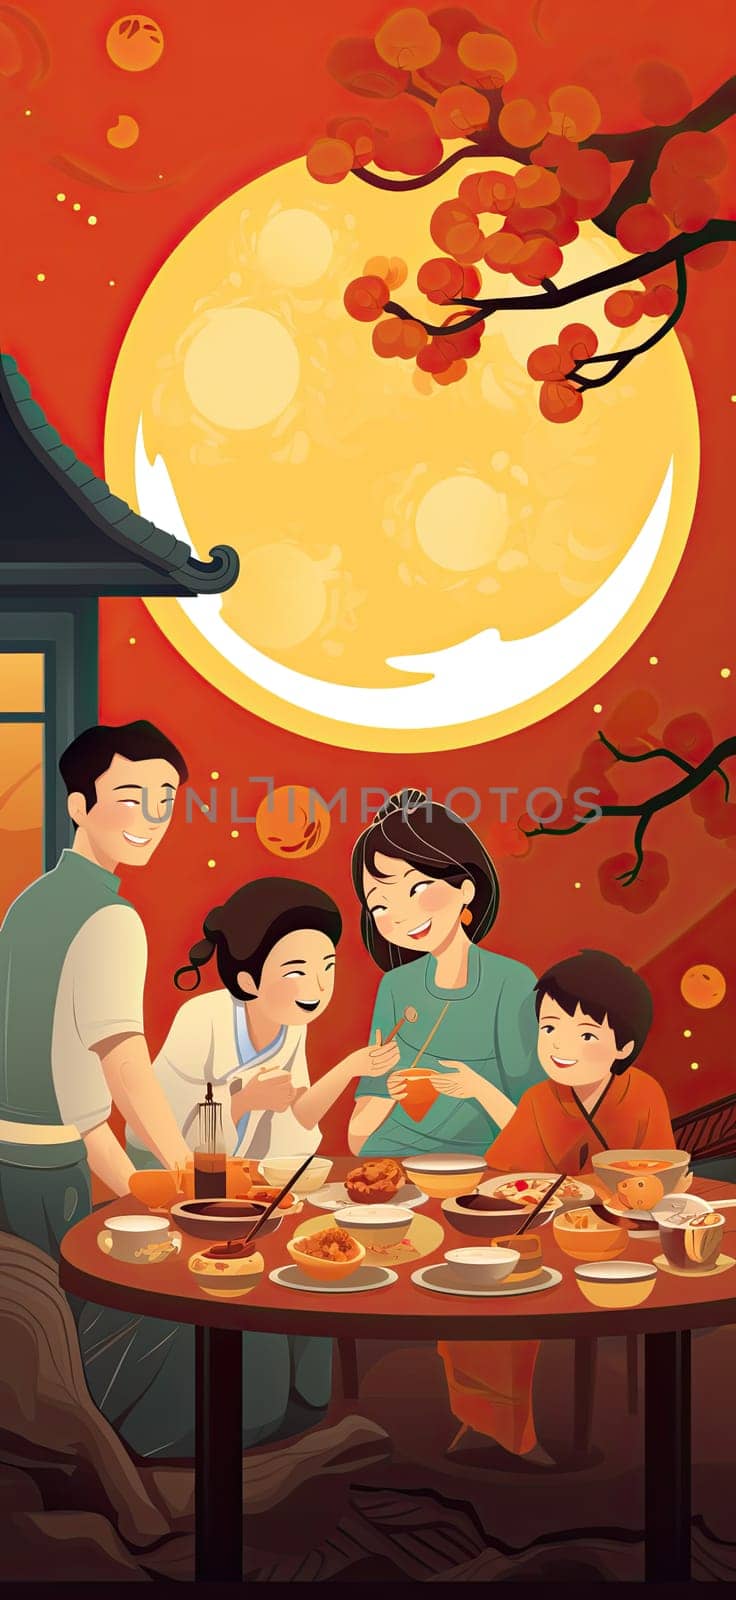 Chinese family eating outside together with moon behind moon and the family,